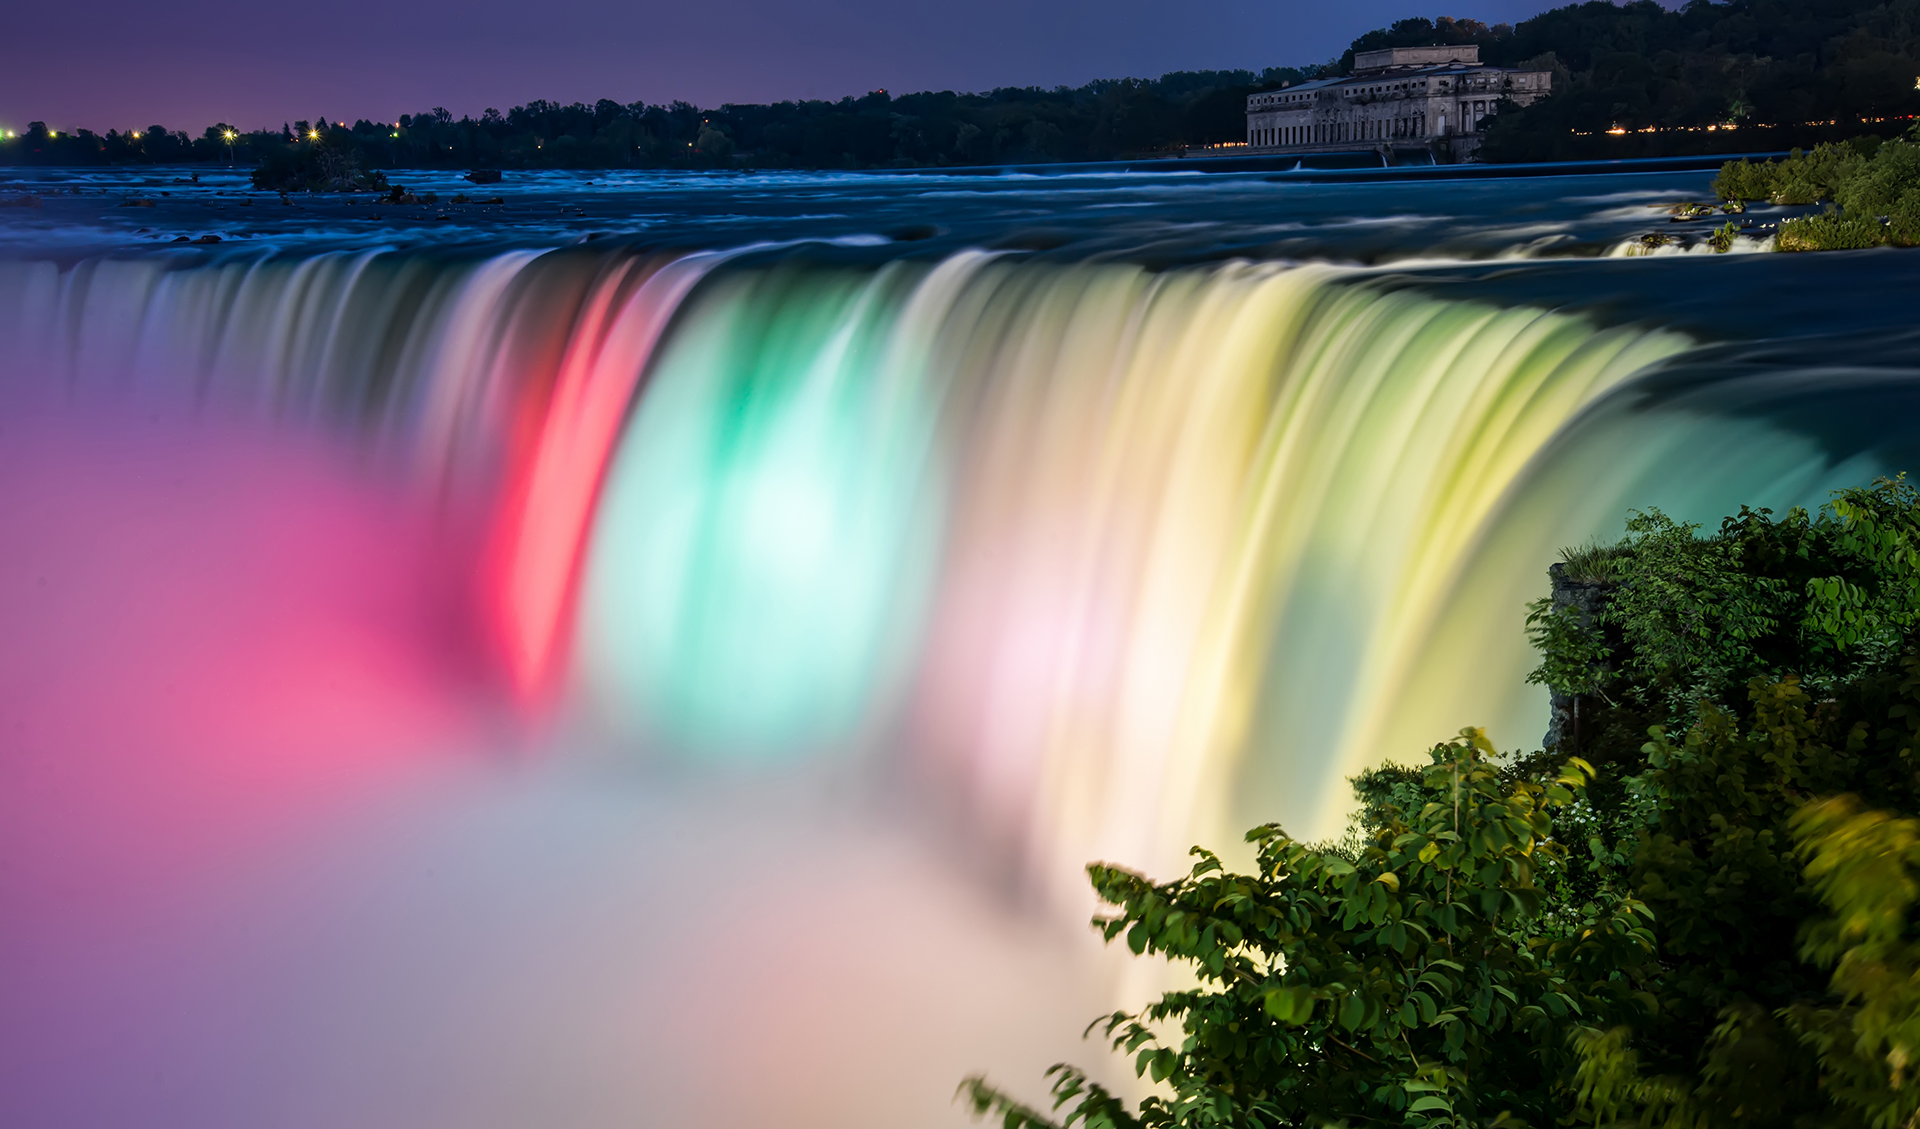  August 12 2015 By admin Comments Off on Niagara Waterfalls Wallpapers